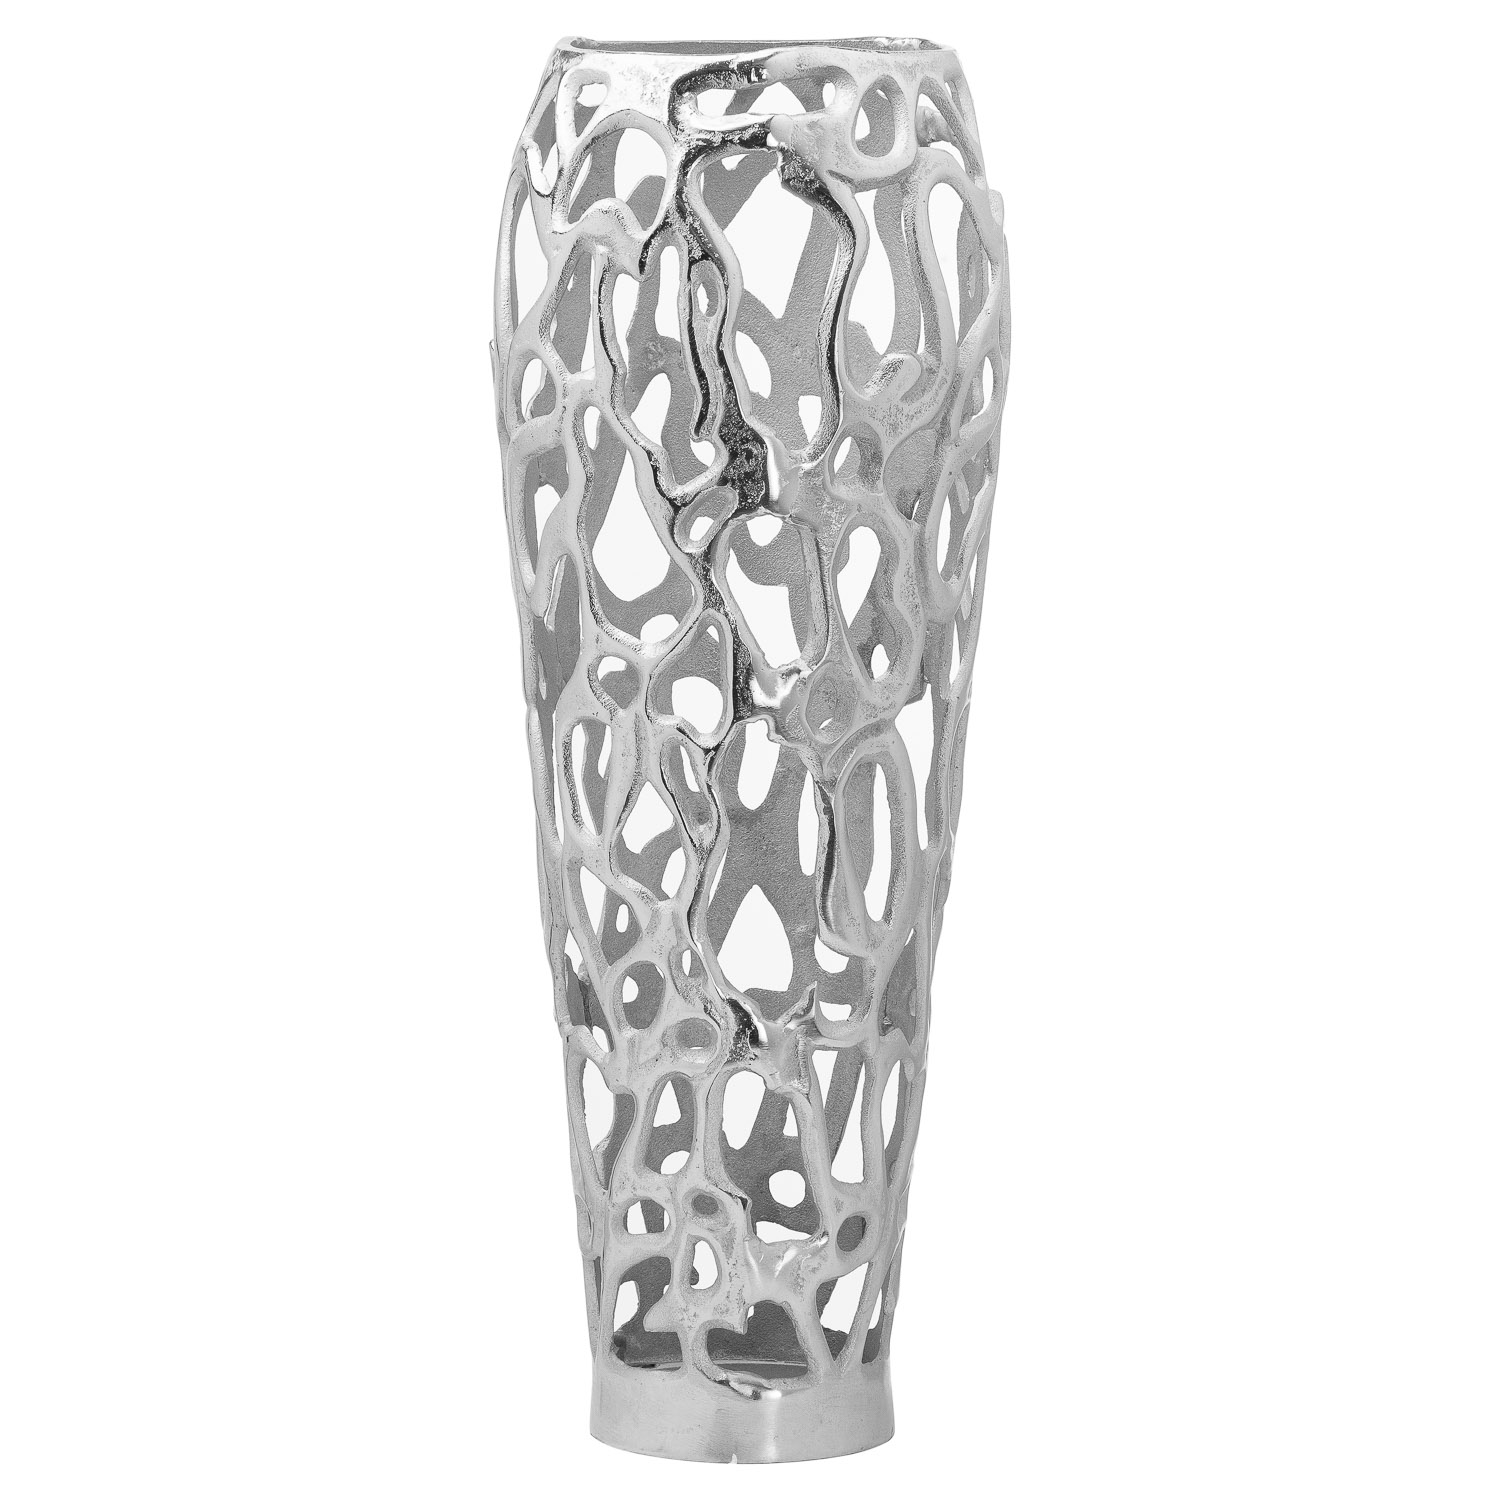 Ohlson Silver Large Perforated Coral Inspired Vase - Image 1